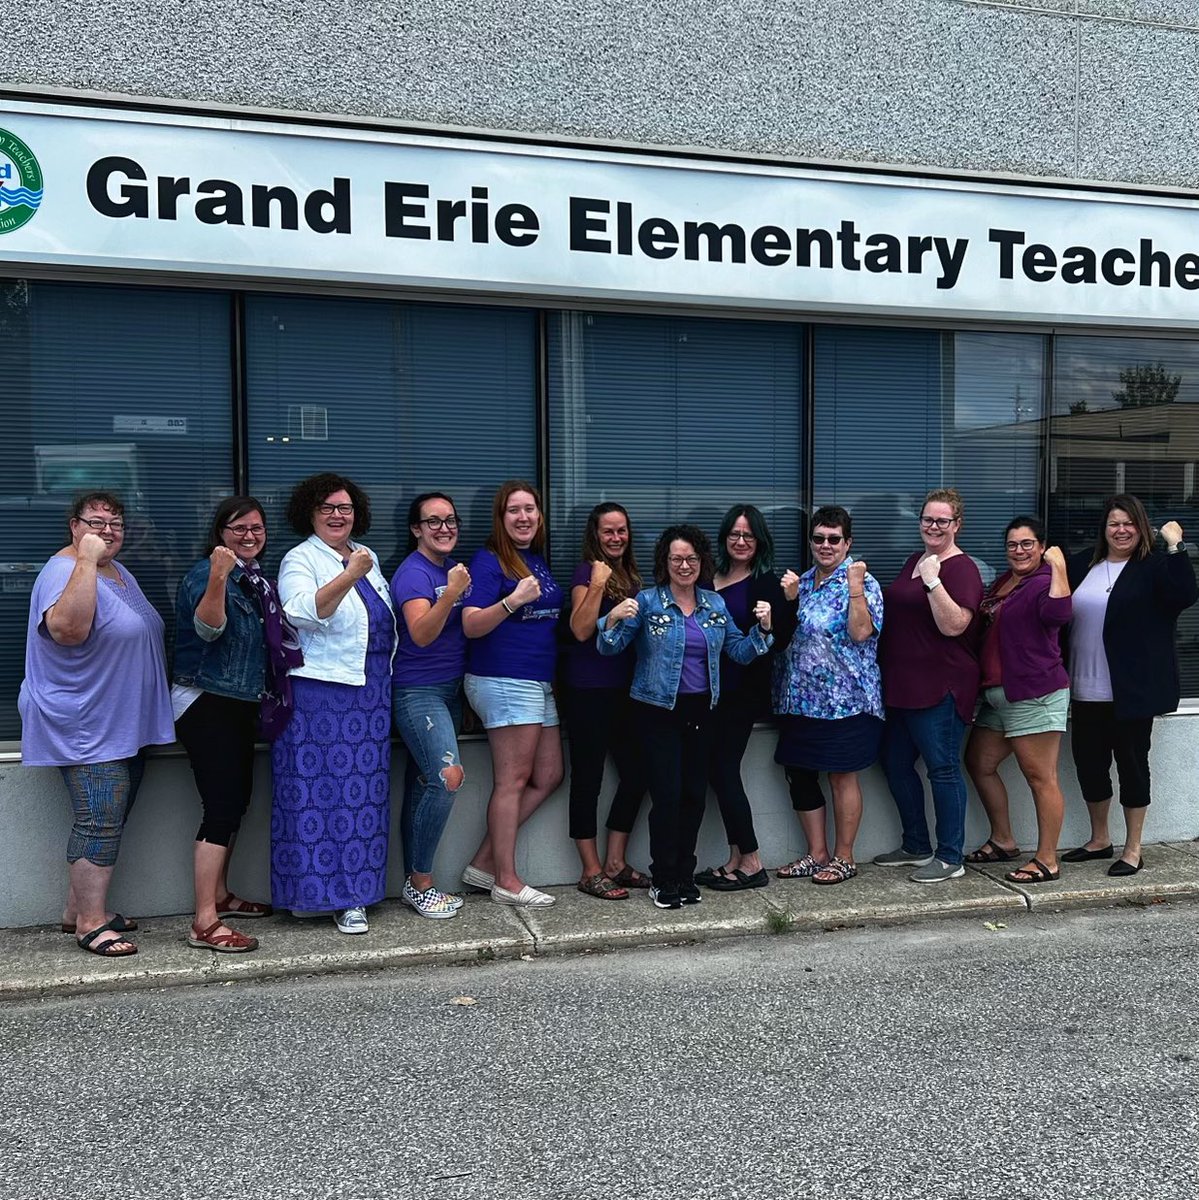 We stand together in solidarity with our #Cupe education worker colleagues!  
We invite Grand Erie ETFO members to wear purple on Wednesdays as a show of support solidarity.  #CUPE #nocutstoeducation #etfostrong  #powerofpurple #powerofpubliceducation #OSBCU